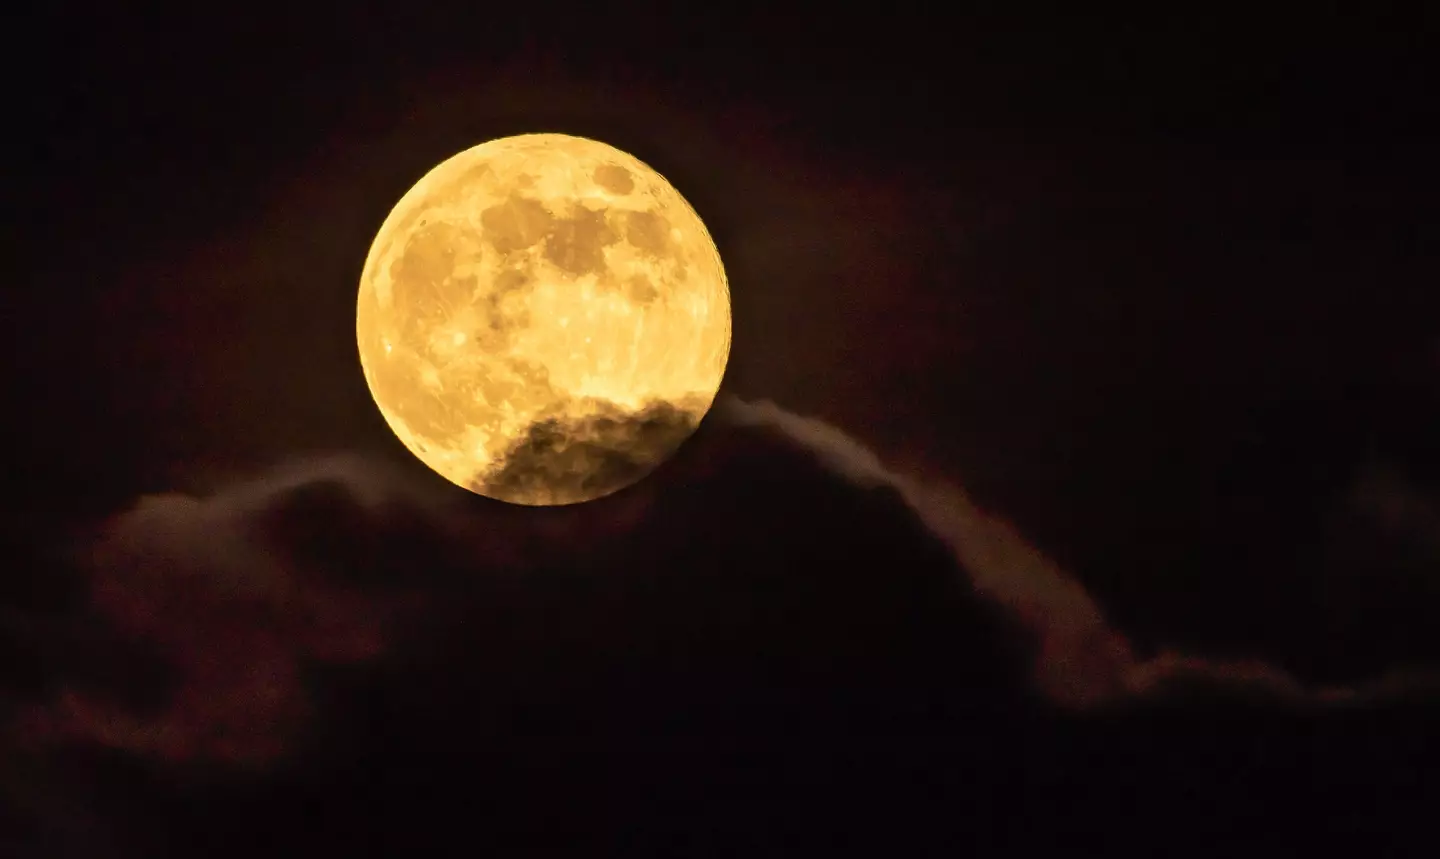 Supermoons occur when the full moon is at its closest point of orbit to the earth.